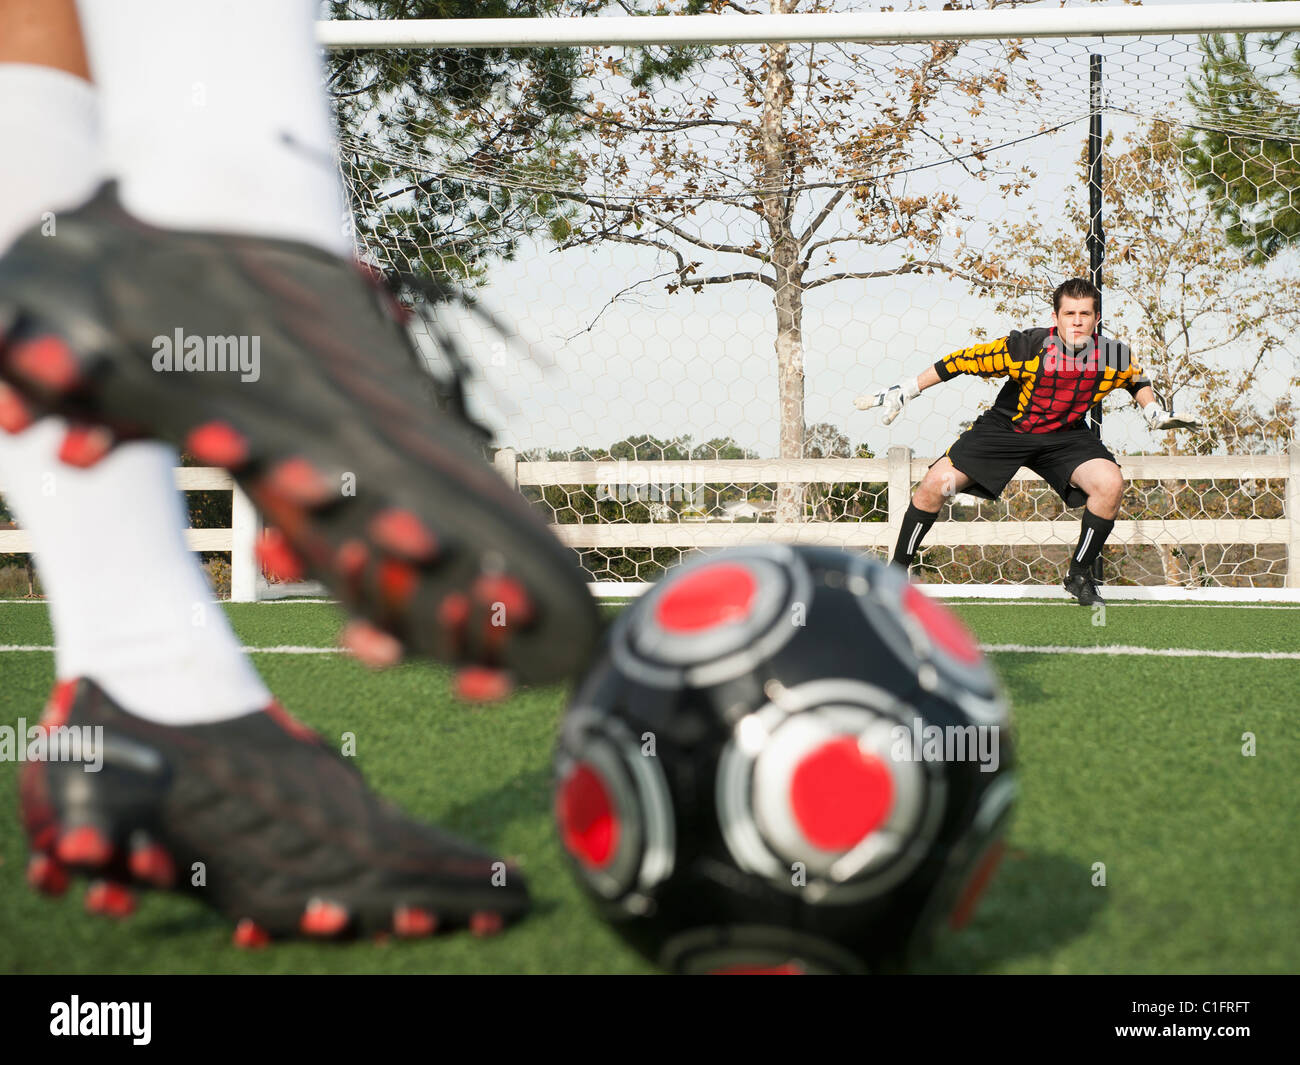 Man Kicking Ball Foot High Resolution Stock Photography And Images Alamy